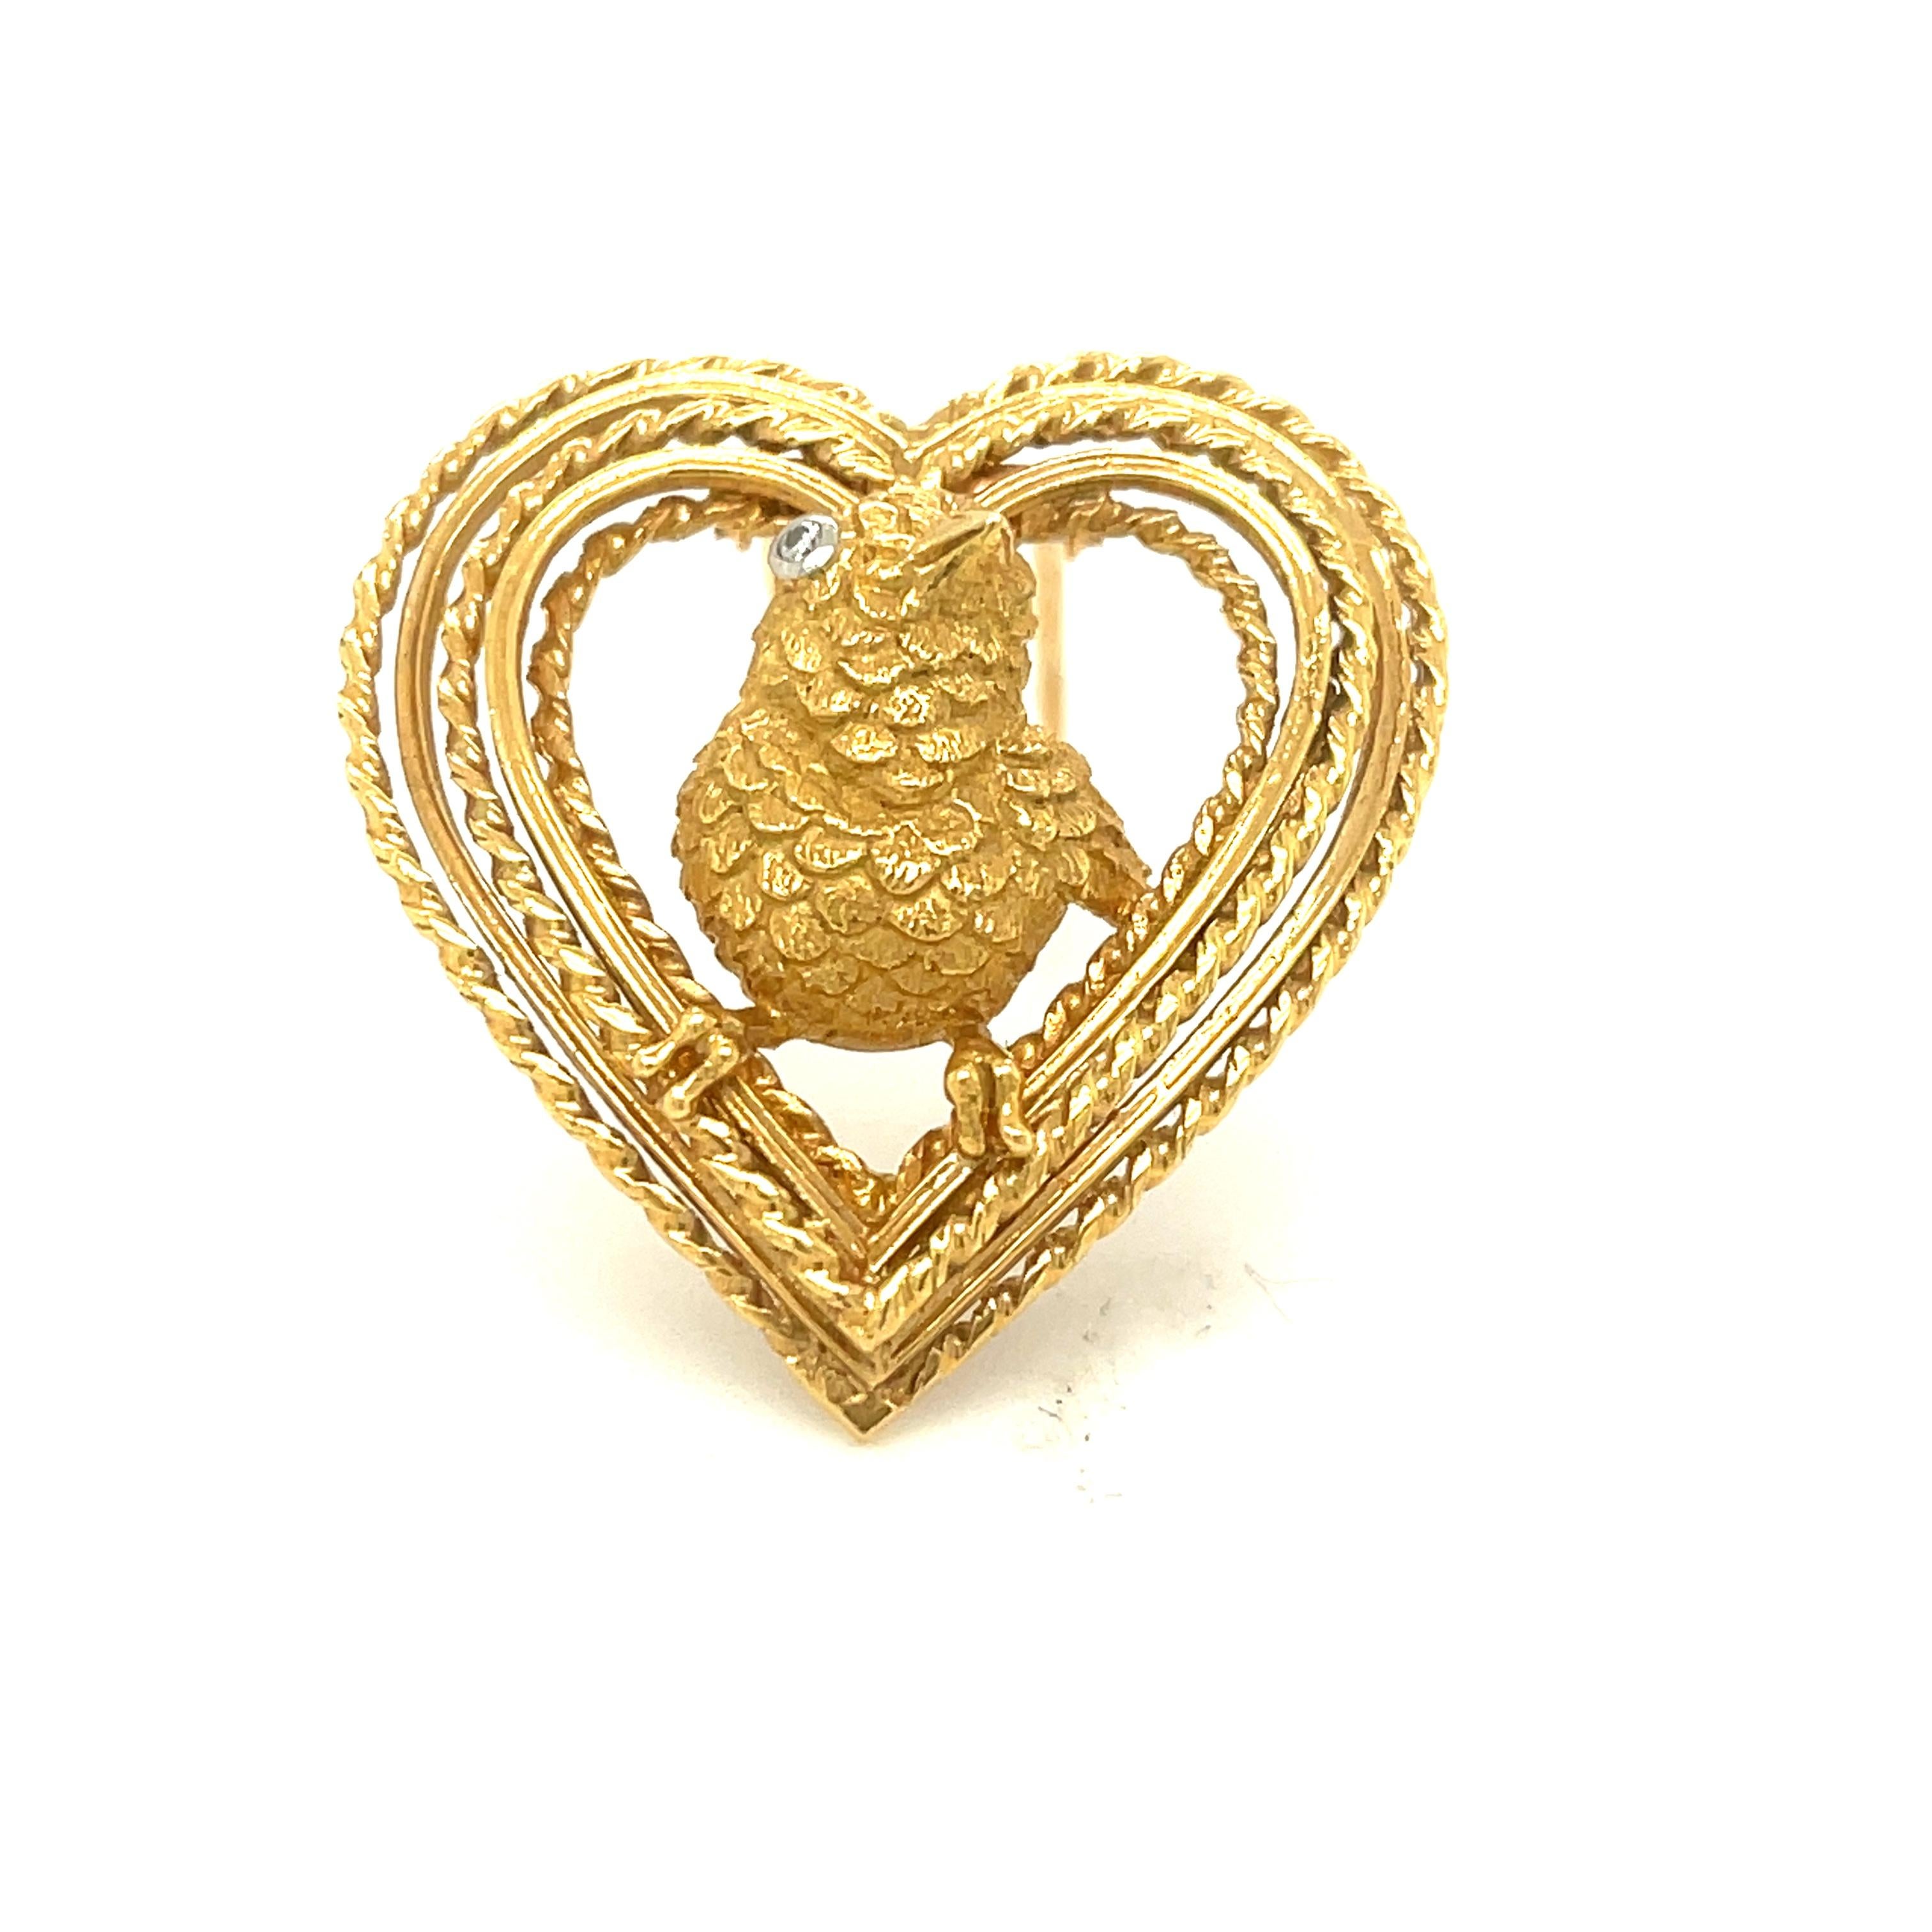 Vintage Cartier 18 Karat Mid-Century Modern Gold Lovebird Pin In Good Condition For Sale In New York, NY